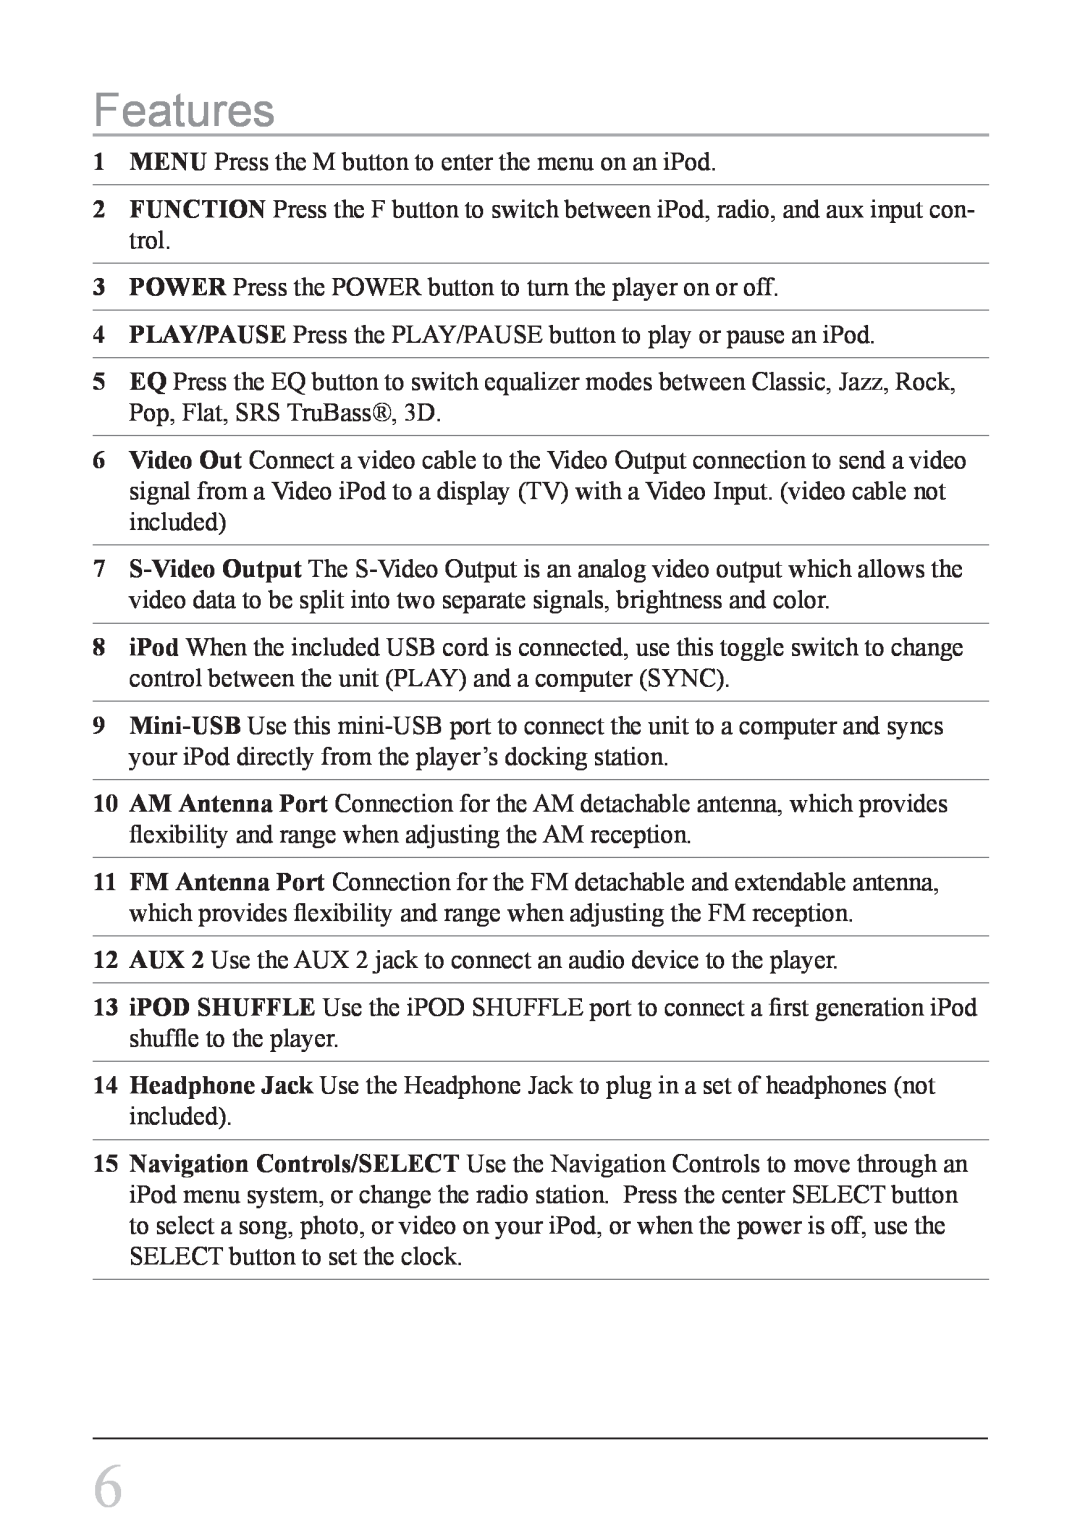 iLive IHS1 IHT3807DT instruction manual Features, 1MENU Press the M button to enter the menu on an iPod 